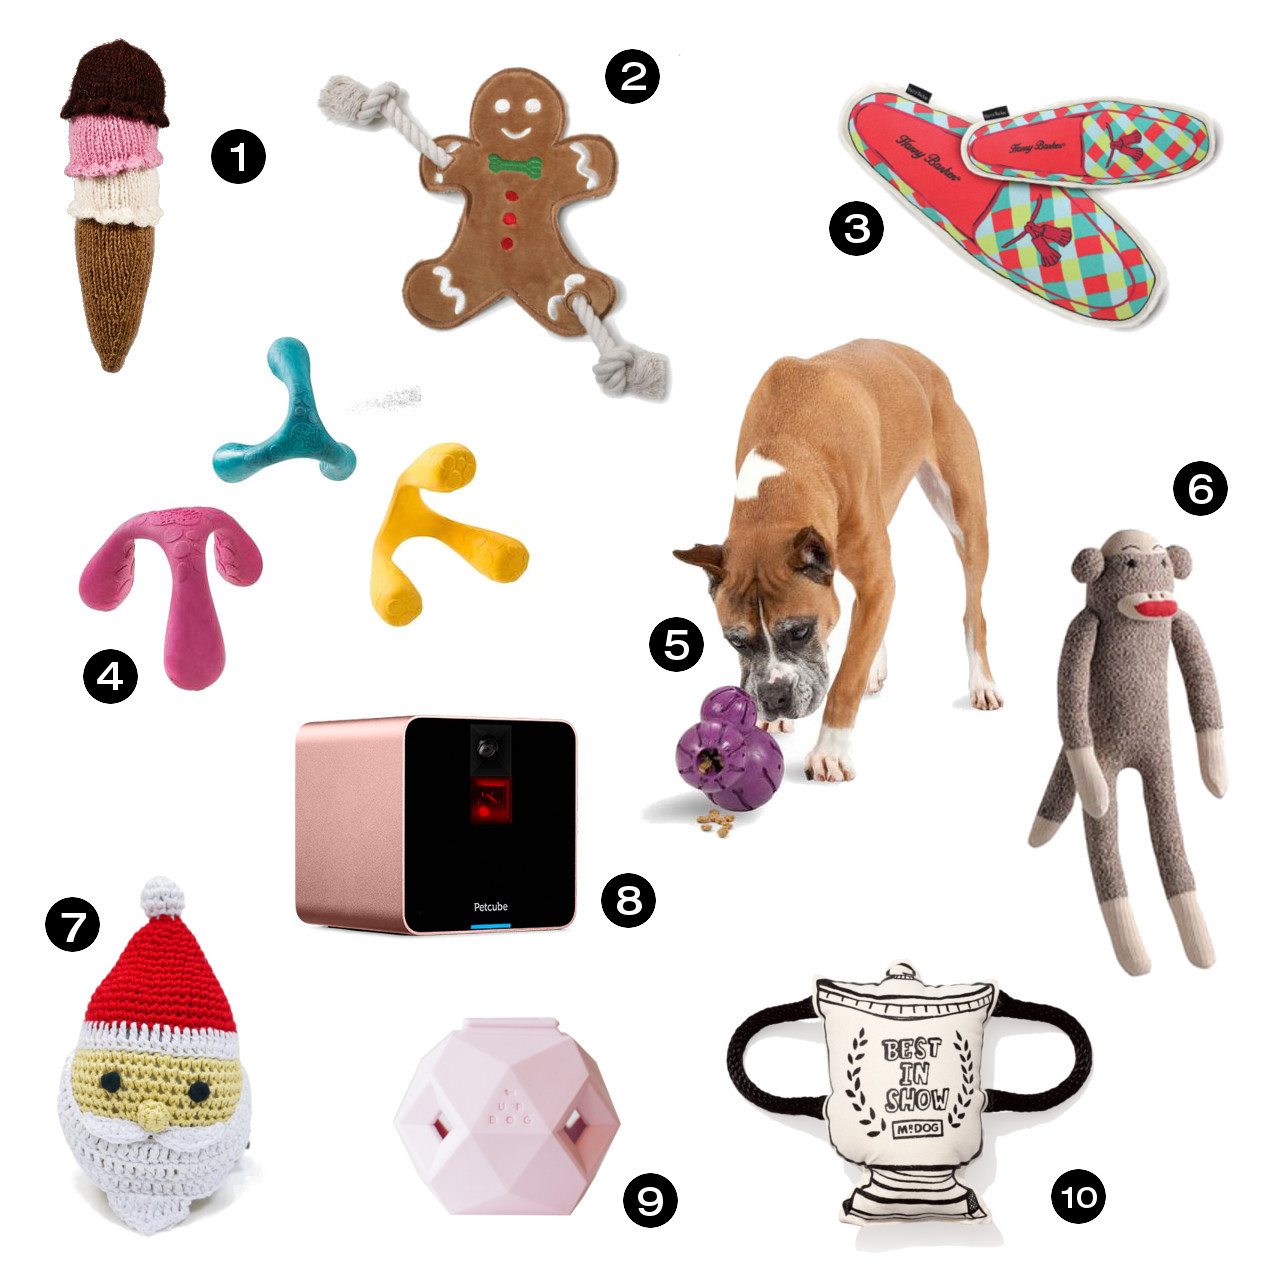 12 Holiday Gifts for Good Dogs